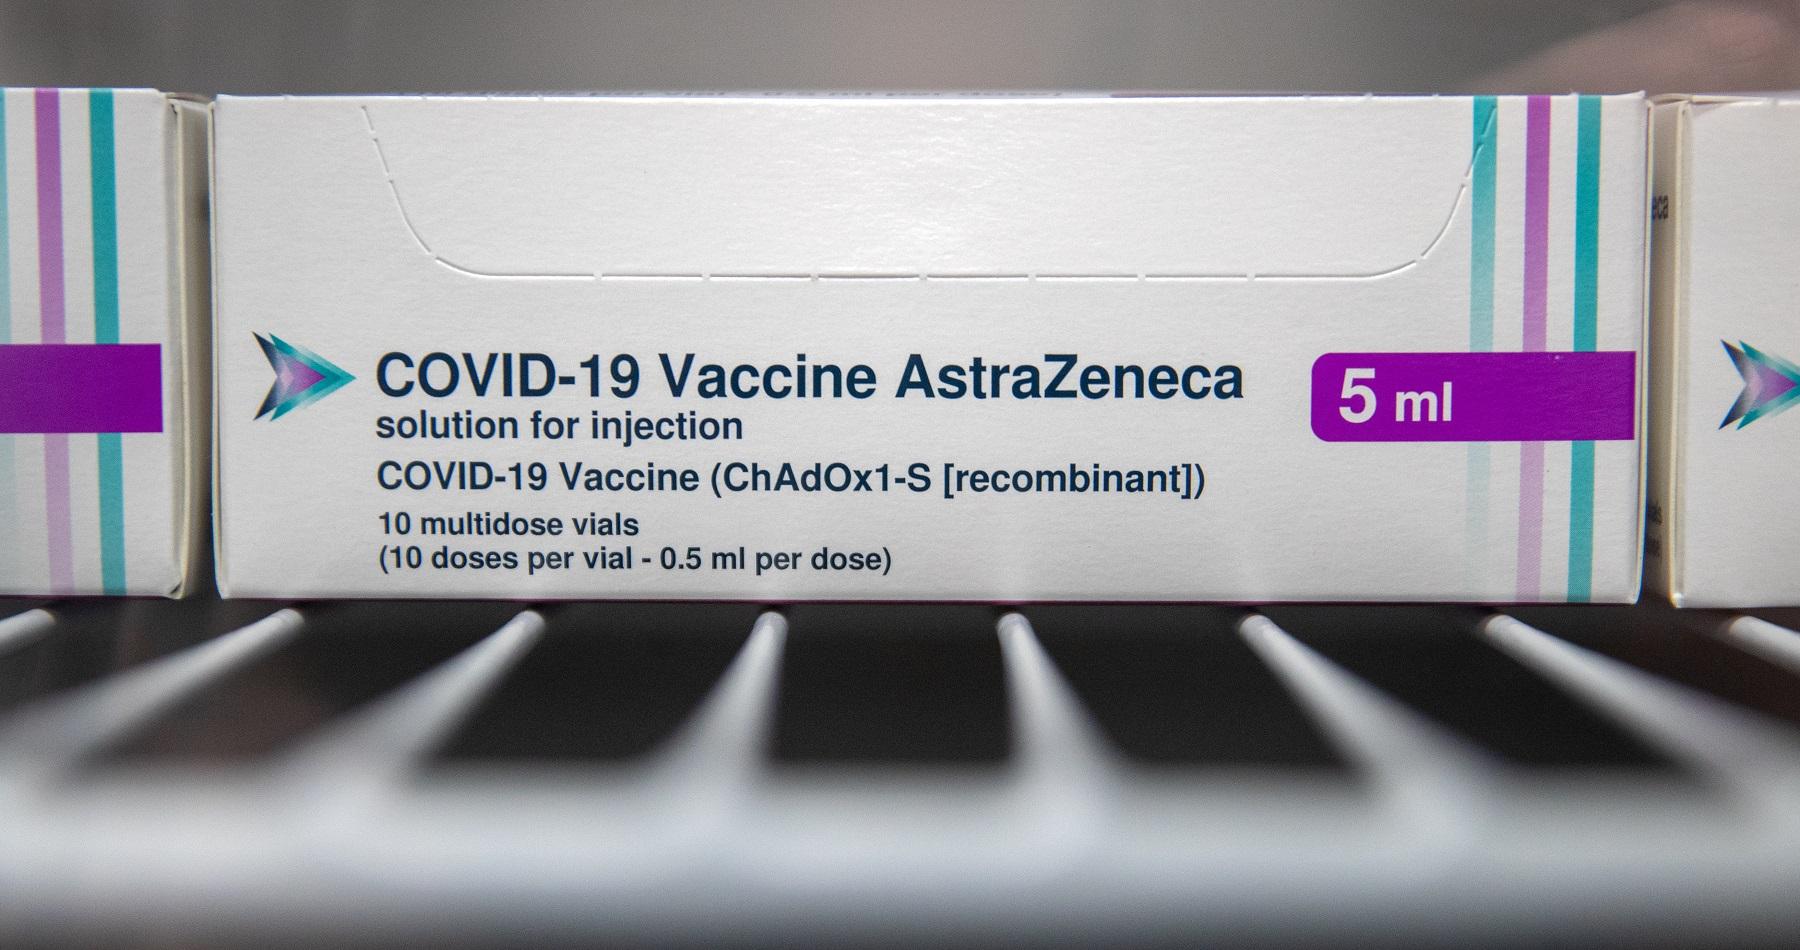 Philippines to sign deal with AstraZeneca for 20M doses of COVID-19 vaccine